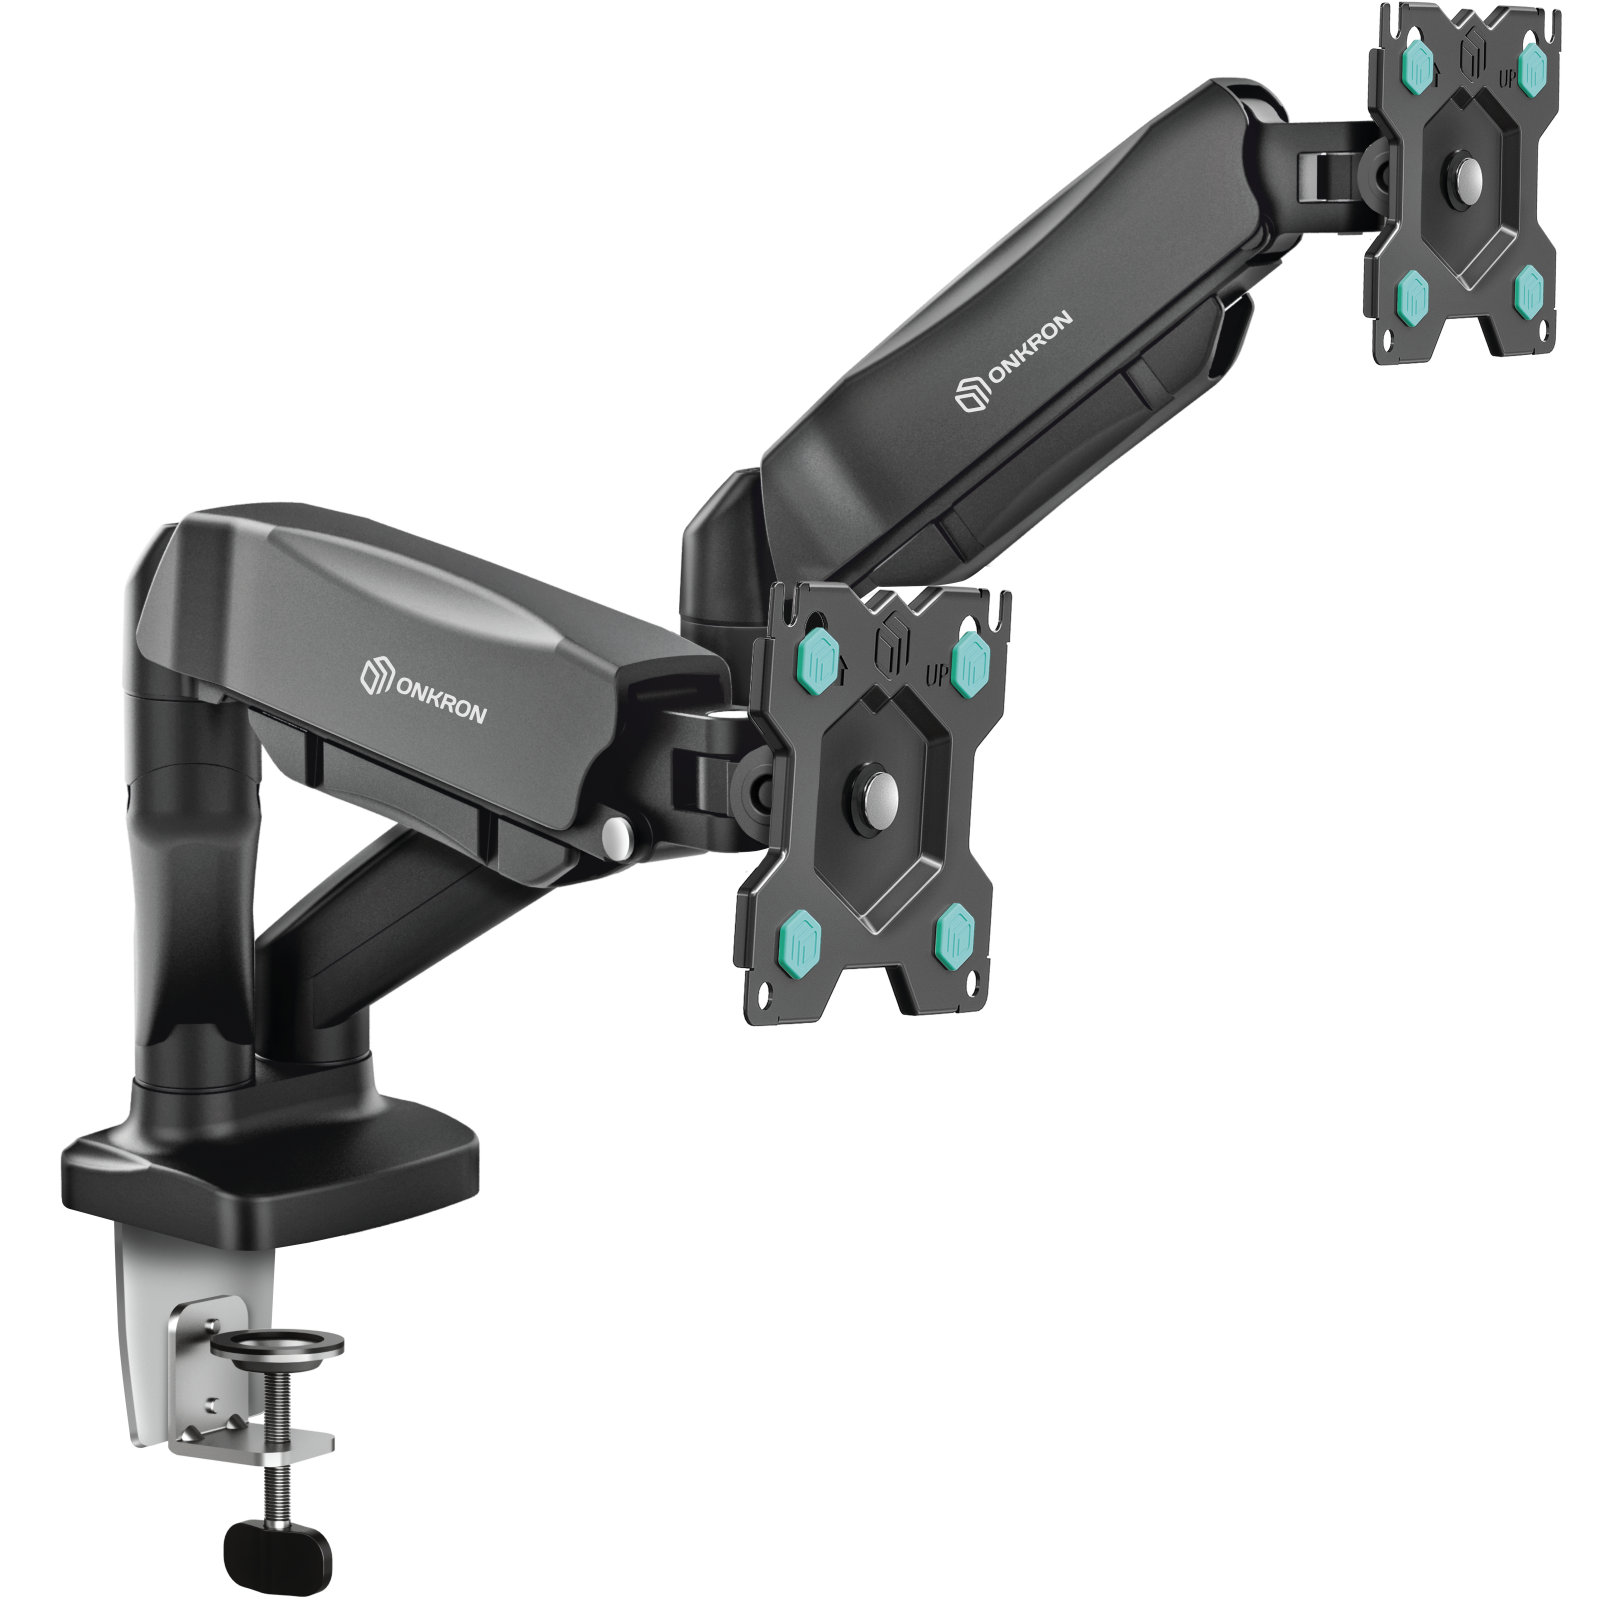 Onkron Dual Monitor Arm For 13-32 Inch Screens Up To 17.6 Lbs Each